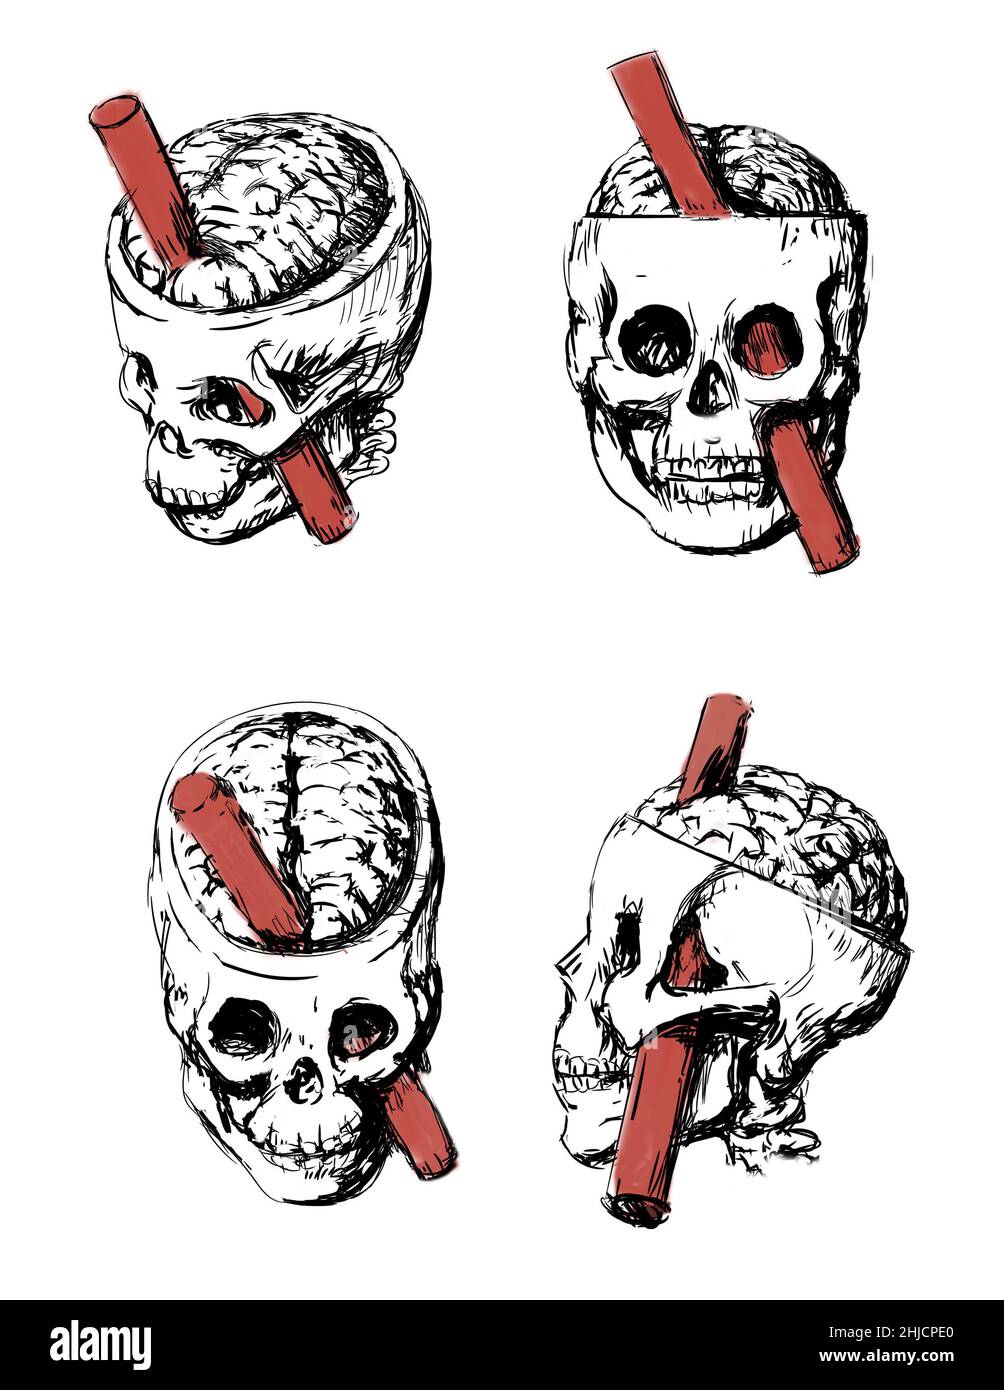 An illustration of the Brain injury of Phineas Gage. Phineas P. Gage, 1823-1860, was an American railroad worker that survived an accident in 1848 in which a large iron rod was driven through his head. The iron rod destroyed most of his left frontal lobe. The effects of the injury on his personality has been much debated as there is scant written evidence of what his behavior actually was for the twelve remaining years of his life. Stock Photo